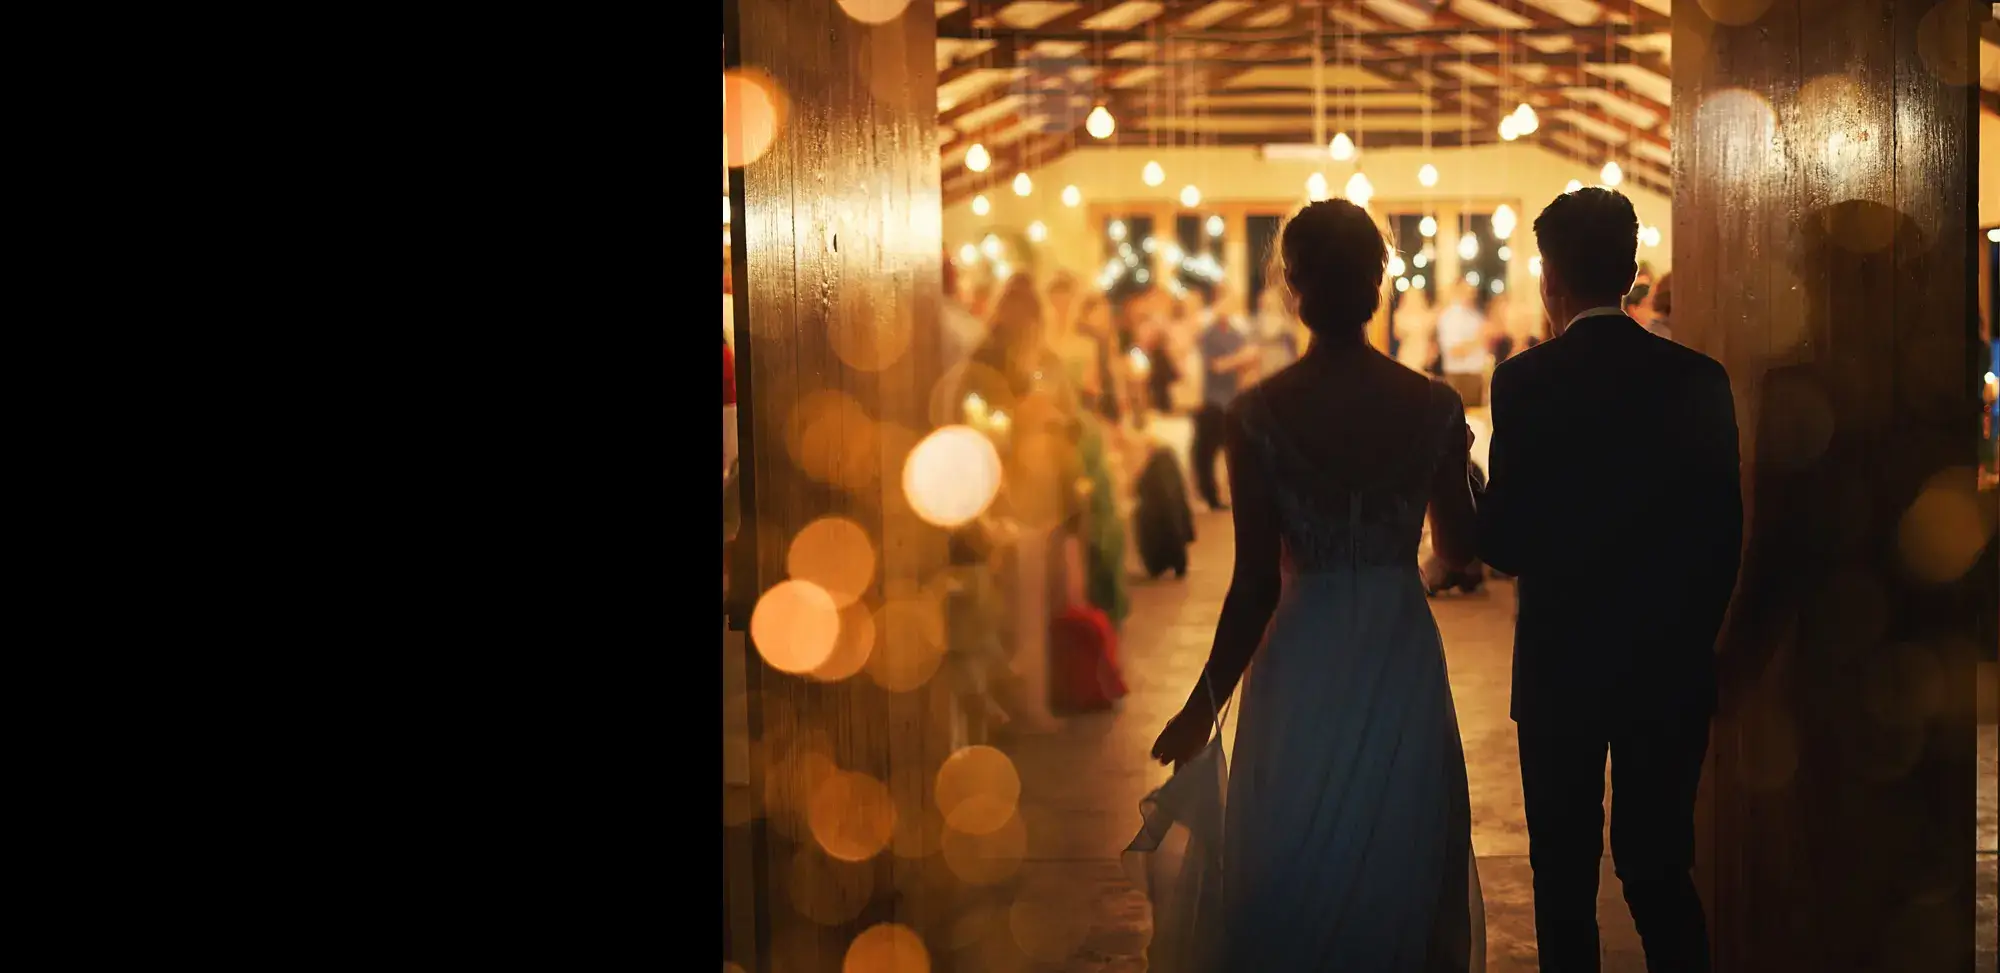 A bride and groom walking through a hallway with lights in the background, captured by experienced Gettysburg DJs.